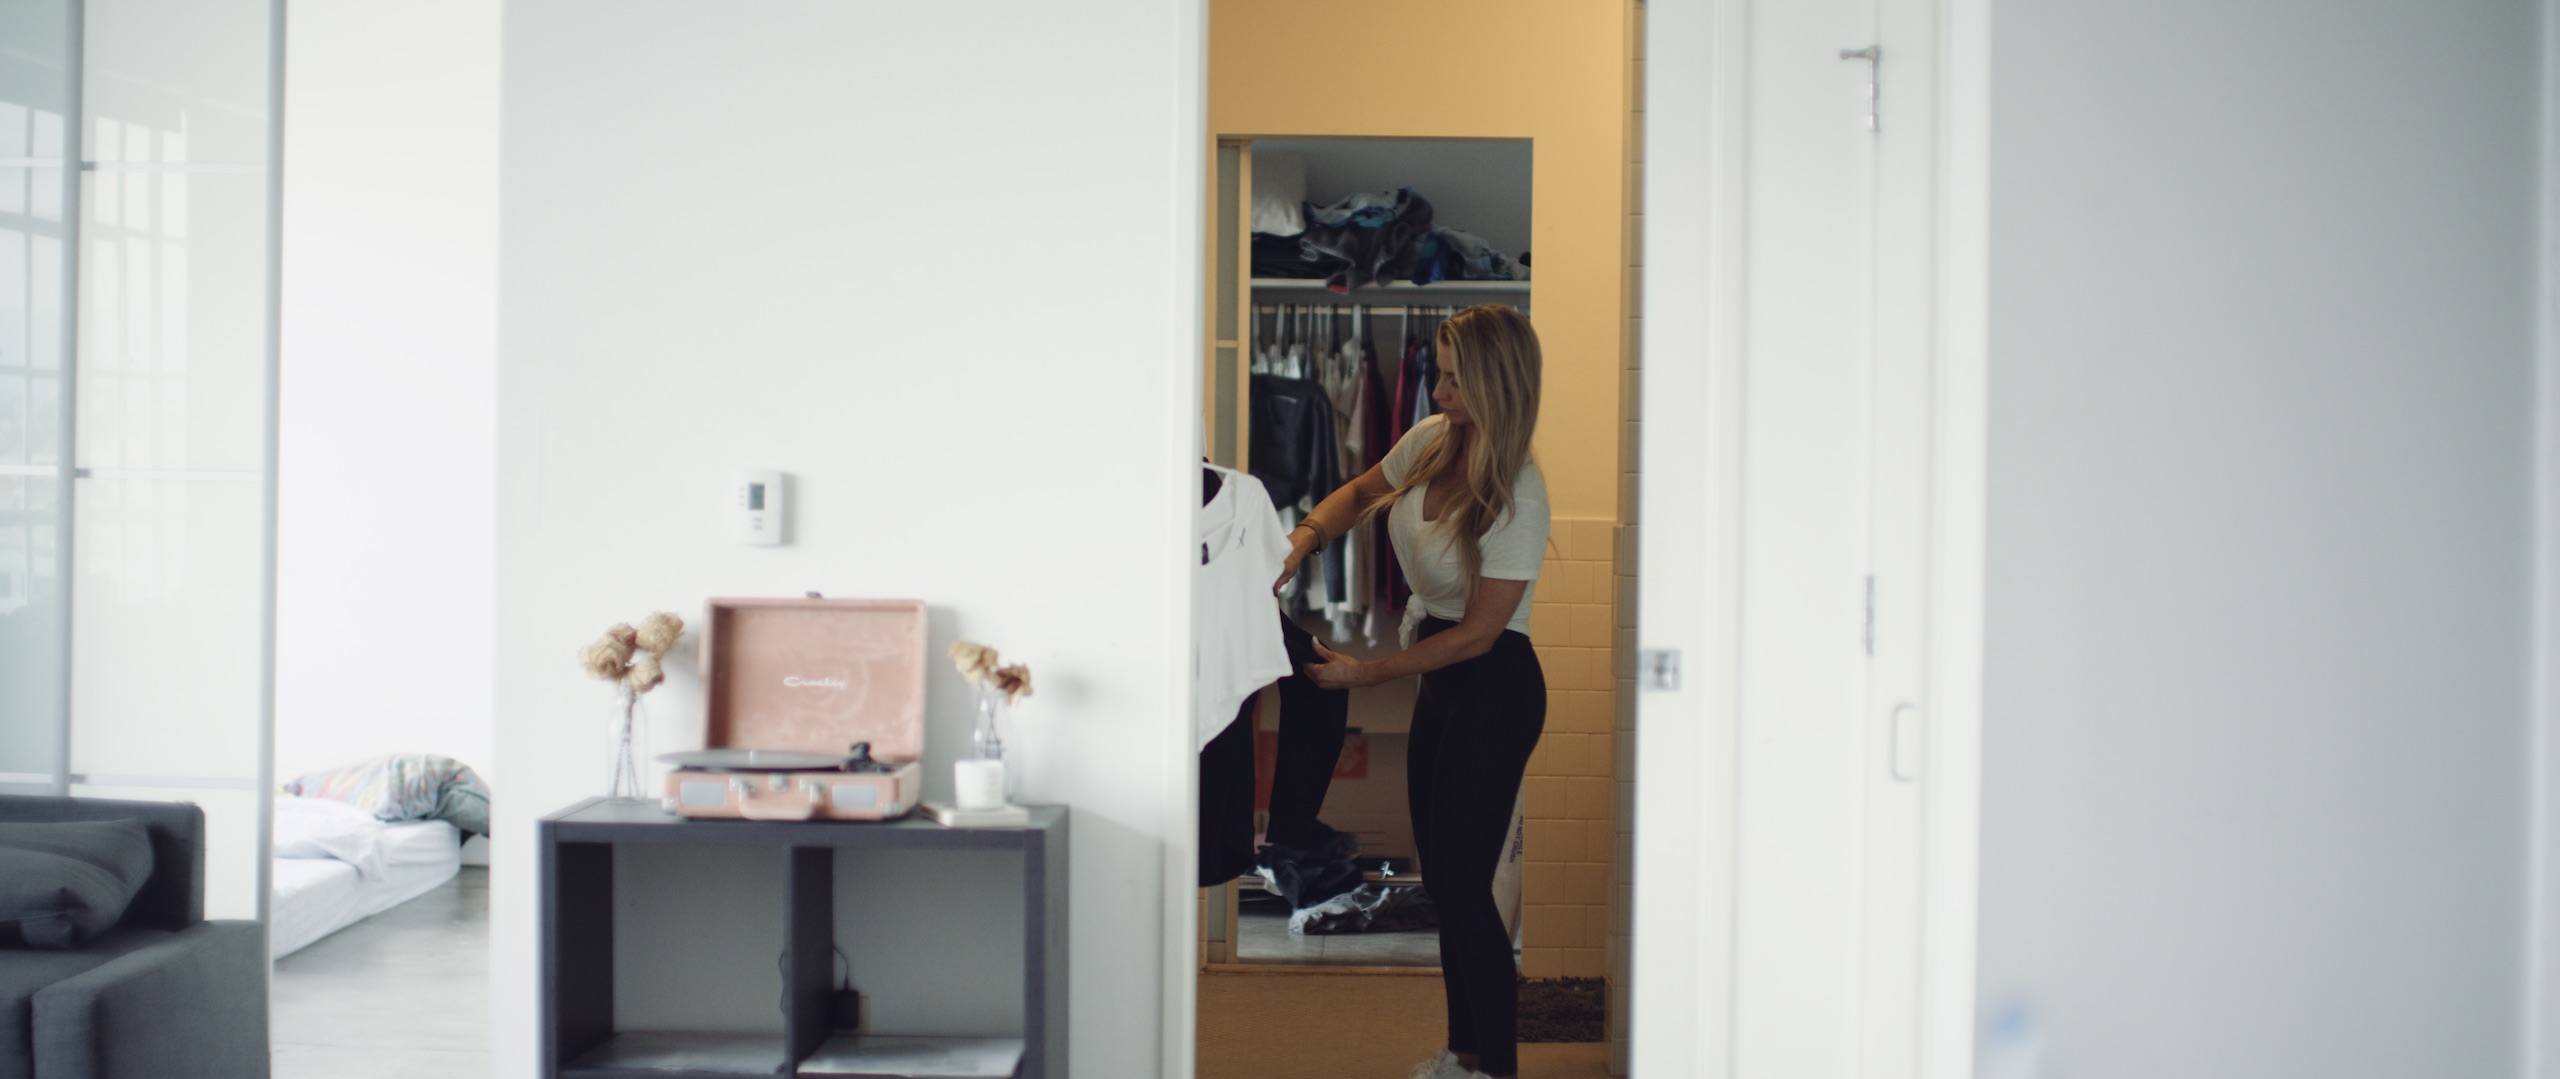 The Dailies Episode 4 The Making of Uncreative Merchandise Shop Side profile of woman with long blond hair working with Uncreative crop top in walk in closet